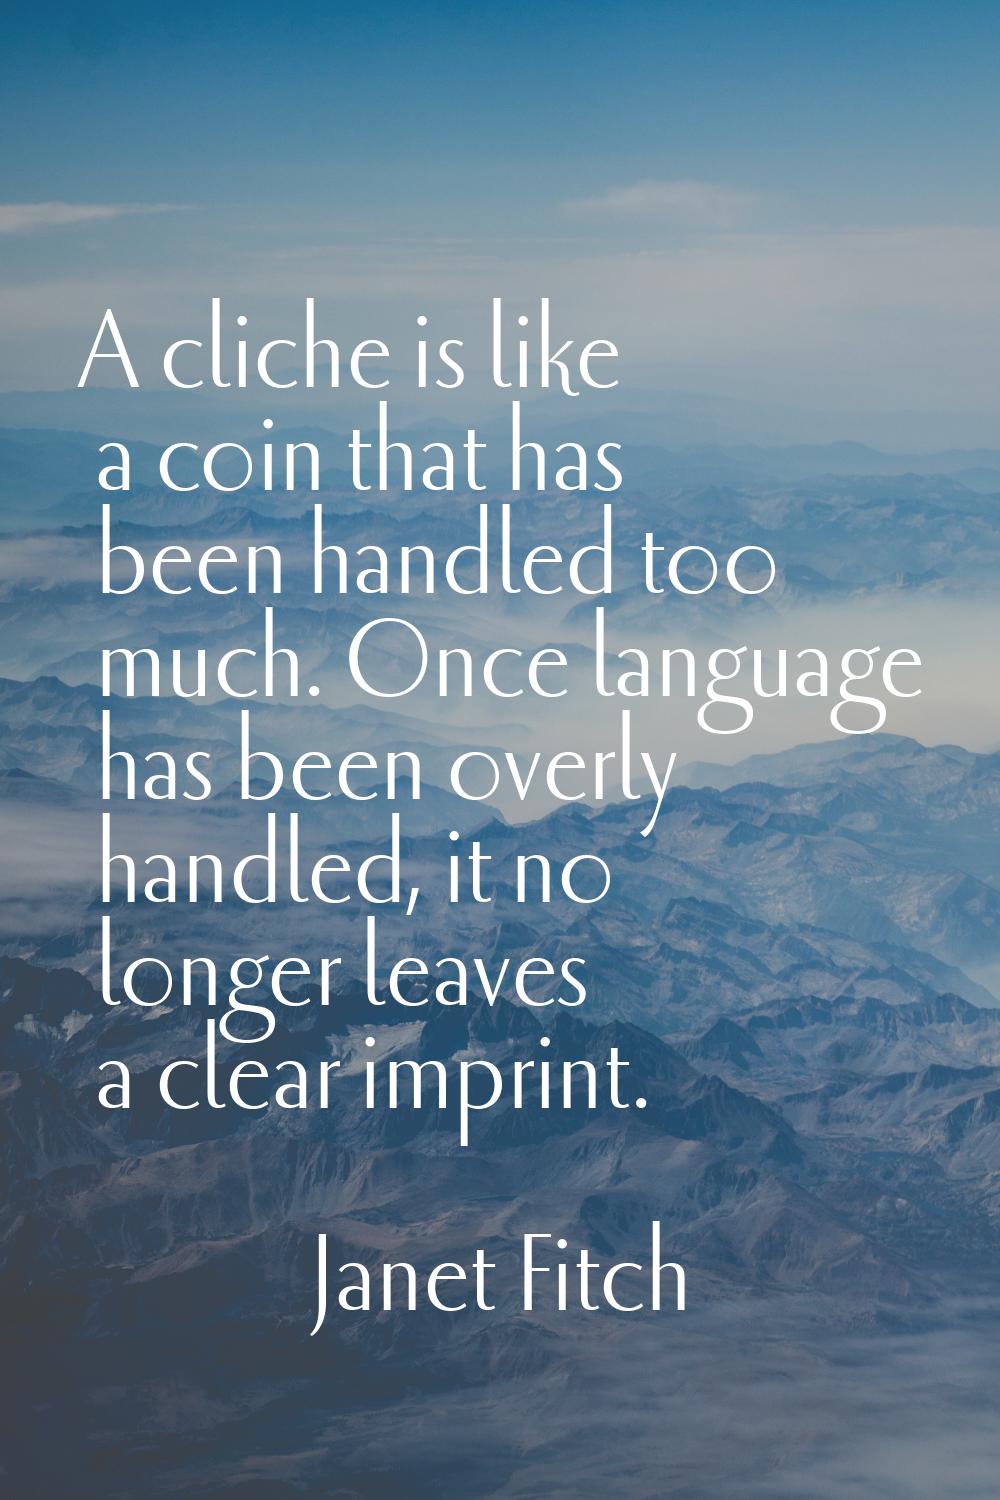 A cliche is like a coin that has been handled too much. Once language has been overly handled, it n